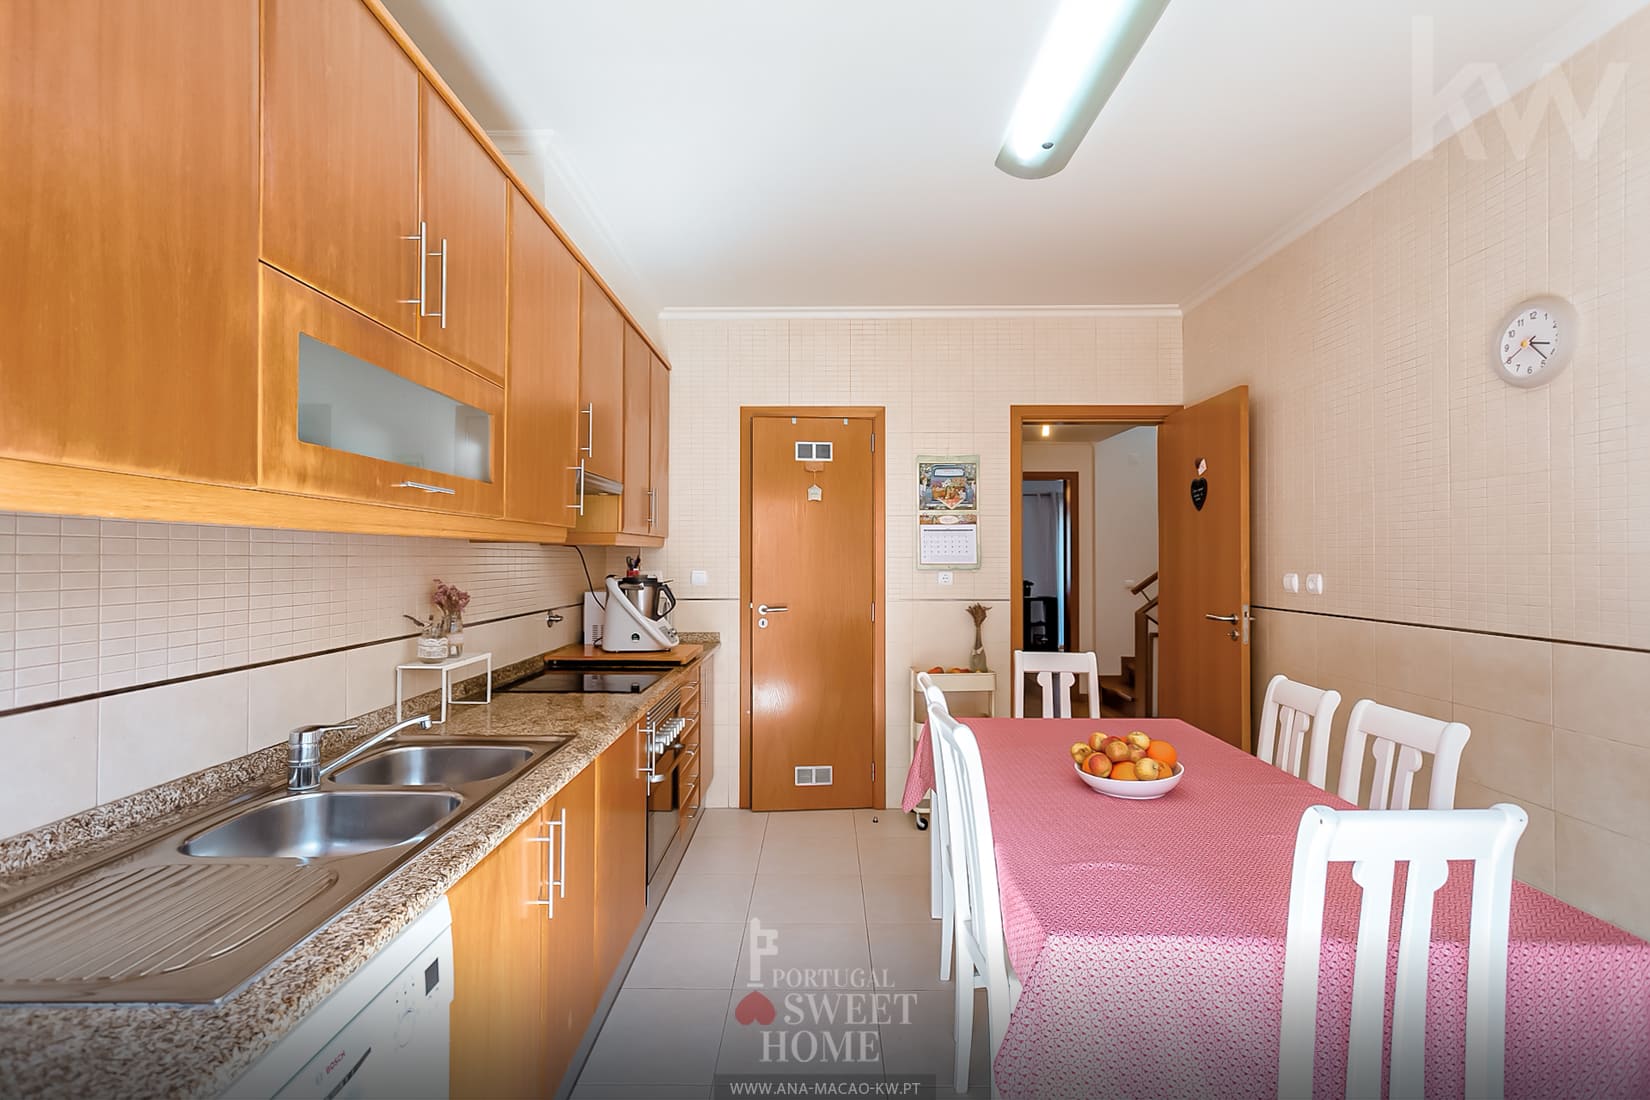 Kitchen (13.7 m²) equipped with hob, stove and extractor hood